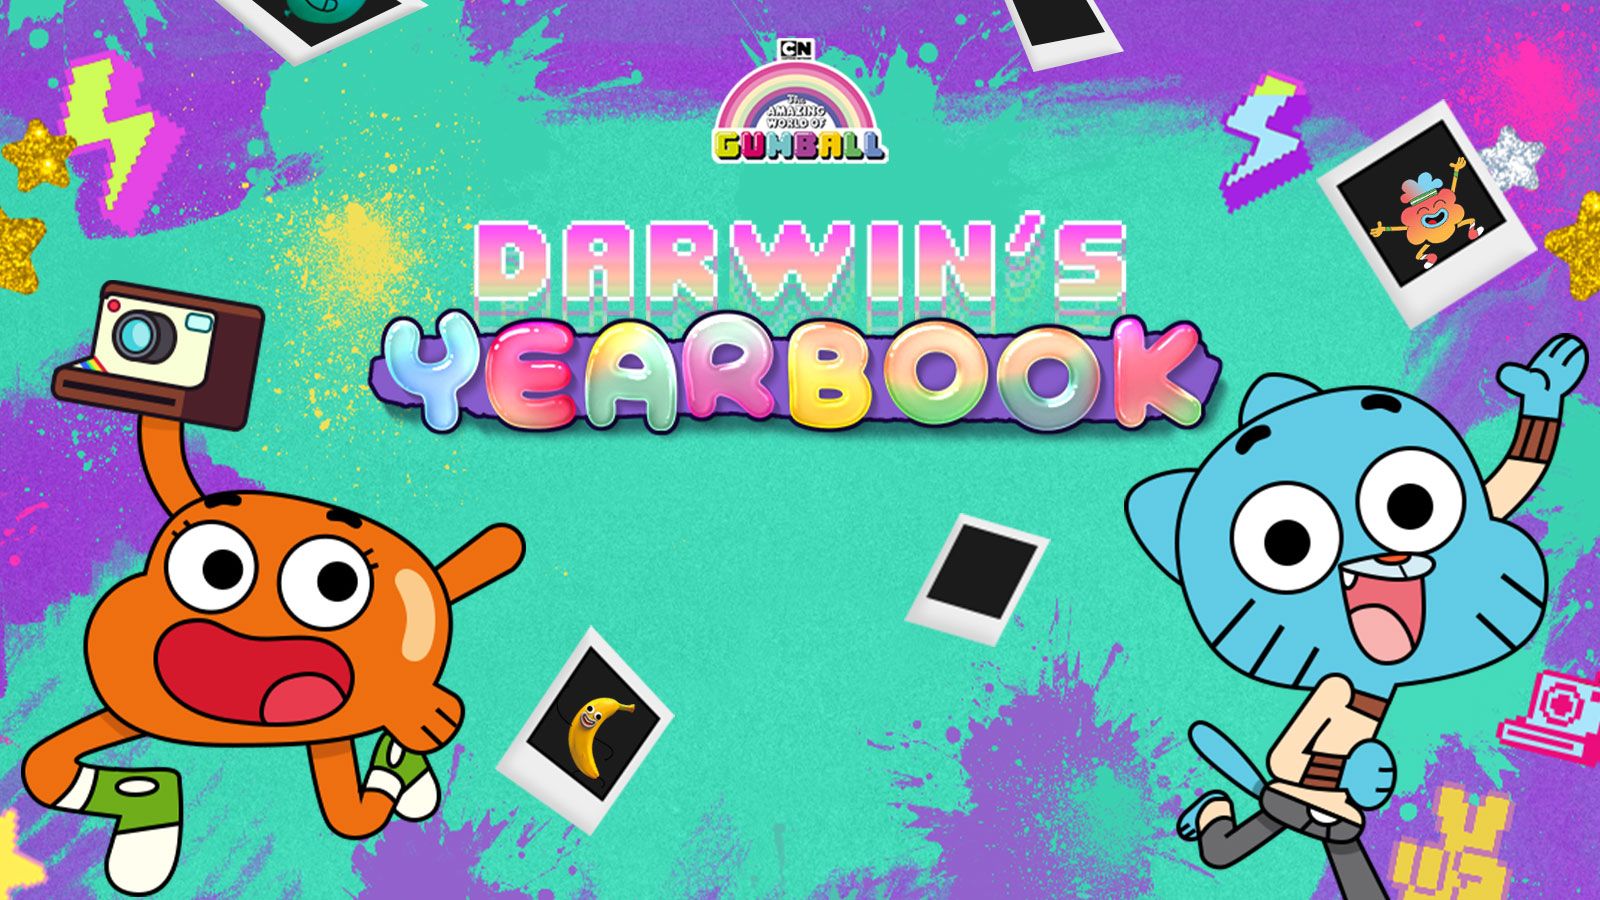 The Amazing World of Gumball. Free online games and videos